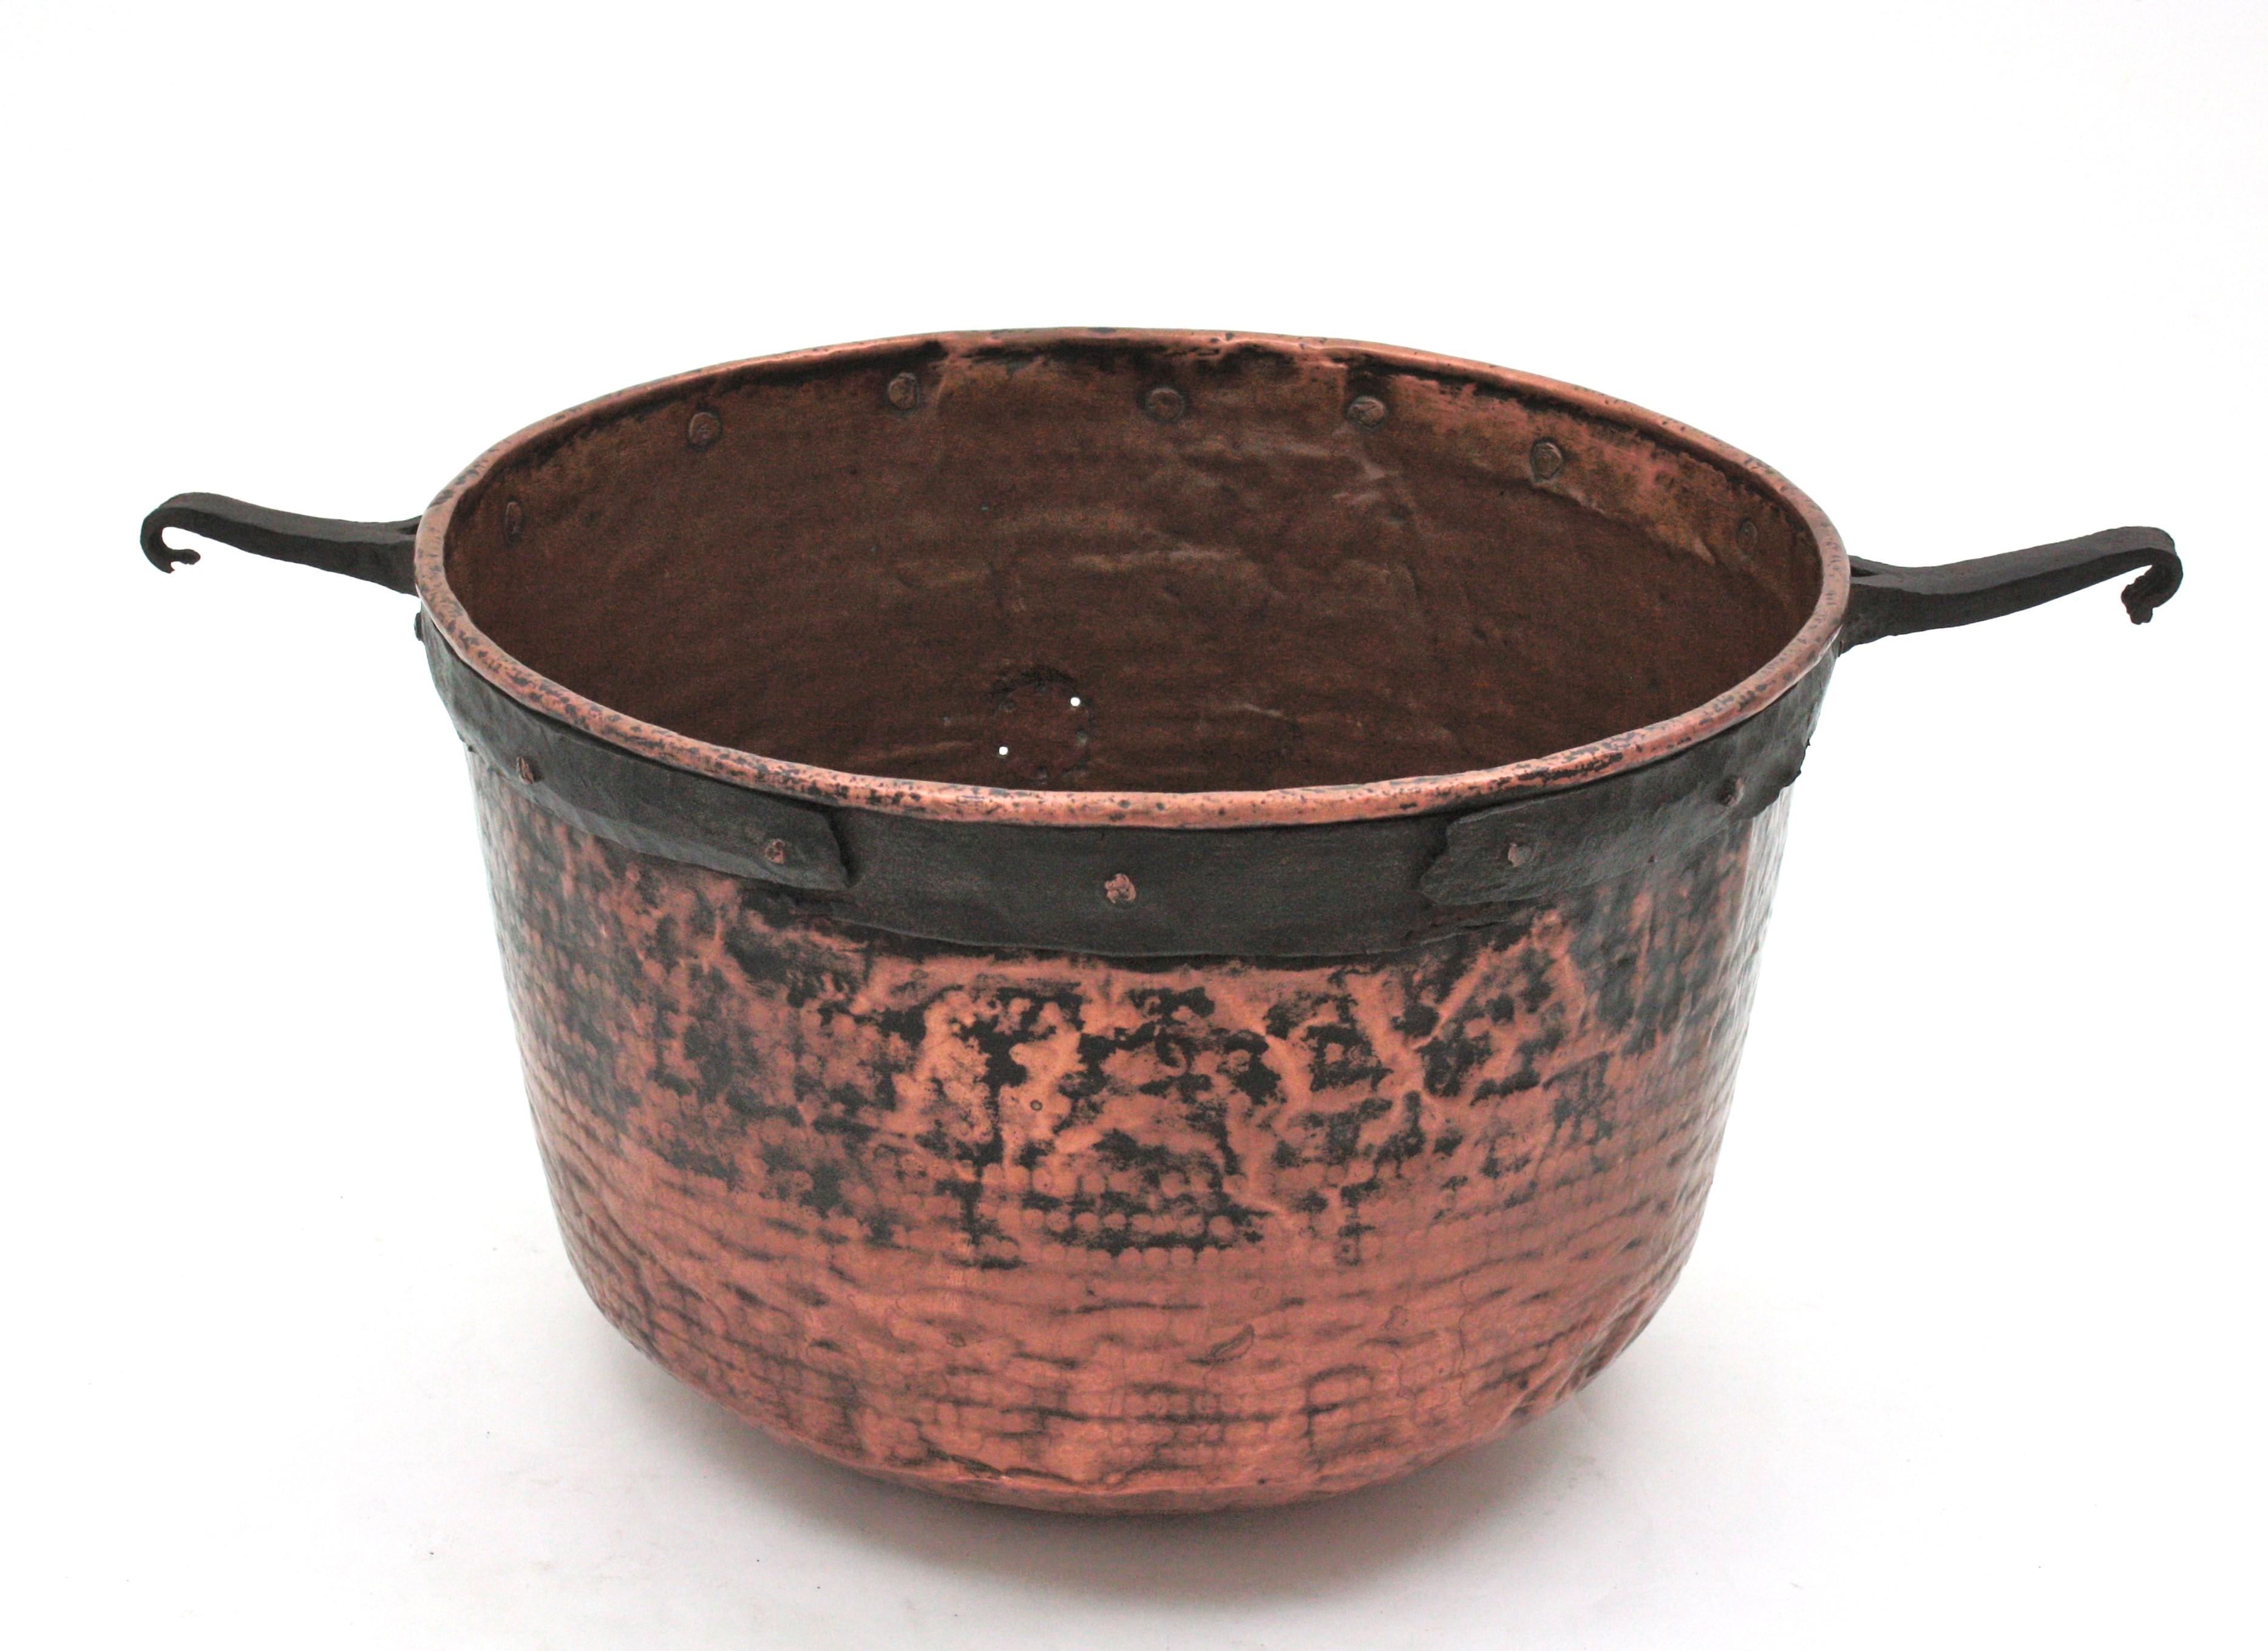 Oversized hand-hammered copper cauldron with iron hook handles. Spain, early 20th century.
This handcrafted copper cauldron has a terrific aged patina. It has an iron rim on the top and forged iron hook handles attached to the cauldron with copper